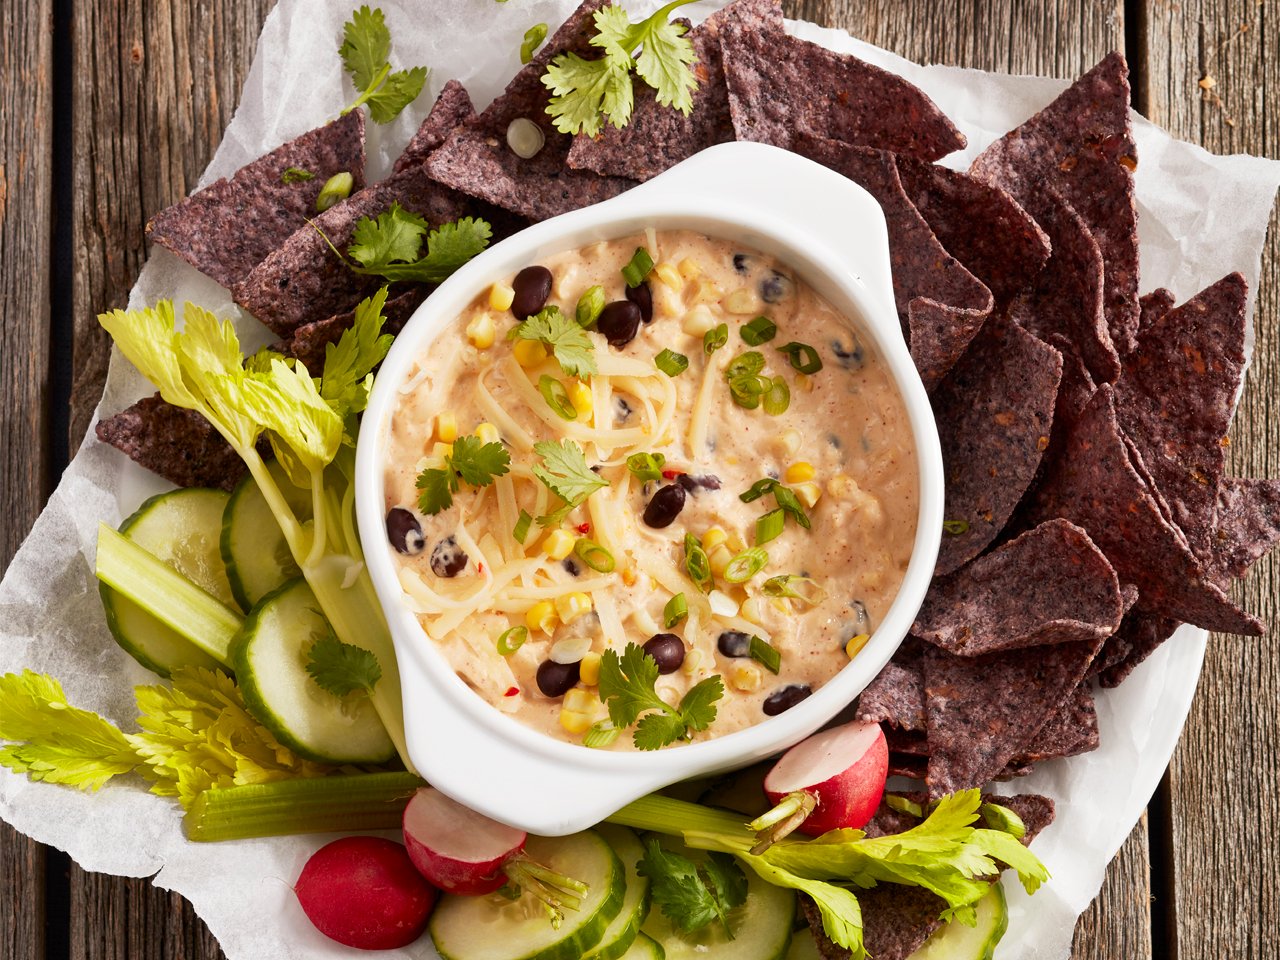 southwest corn and bean cream cheese dip with vegetables and tortilla chips